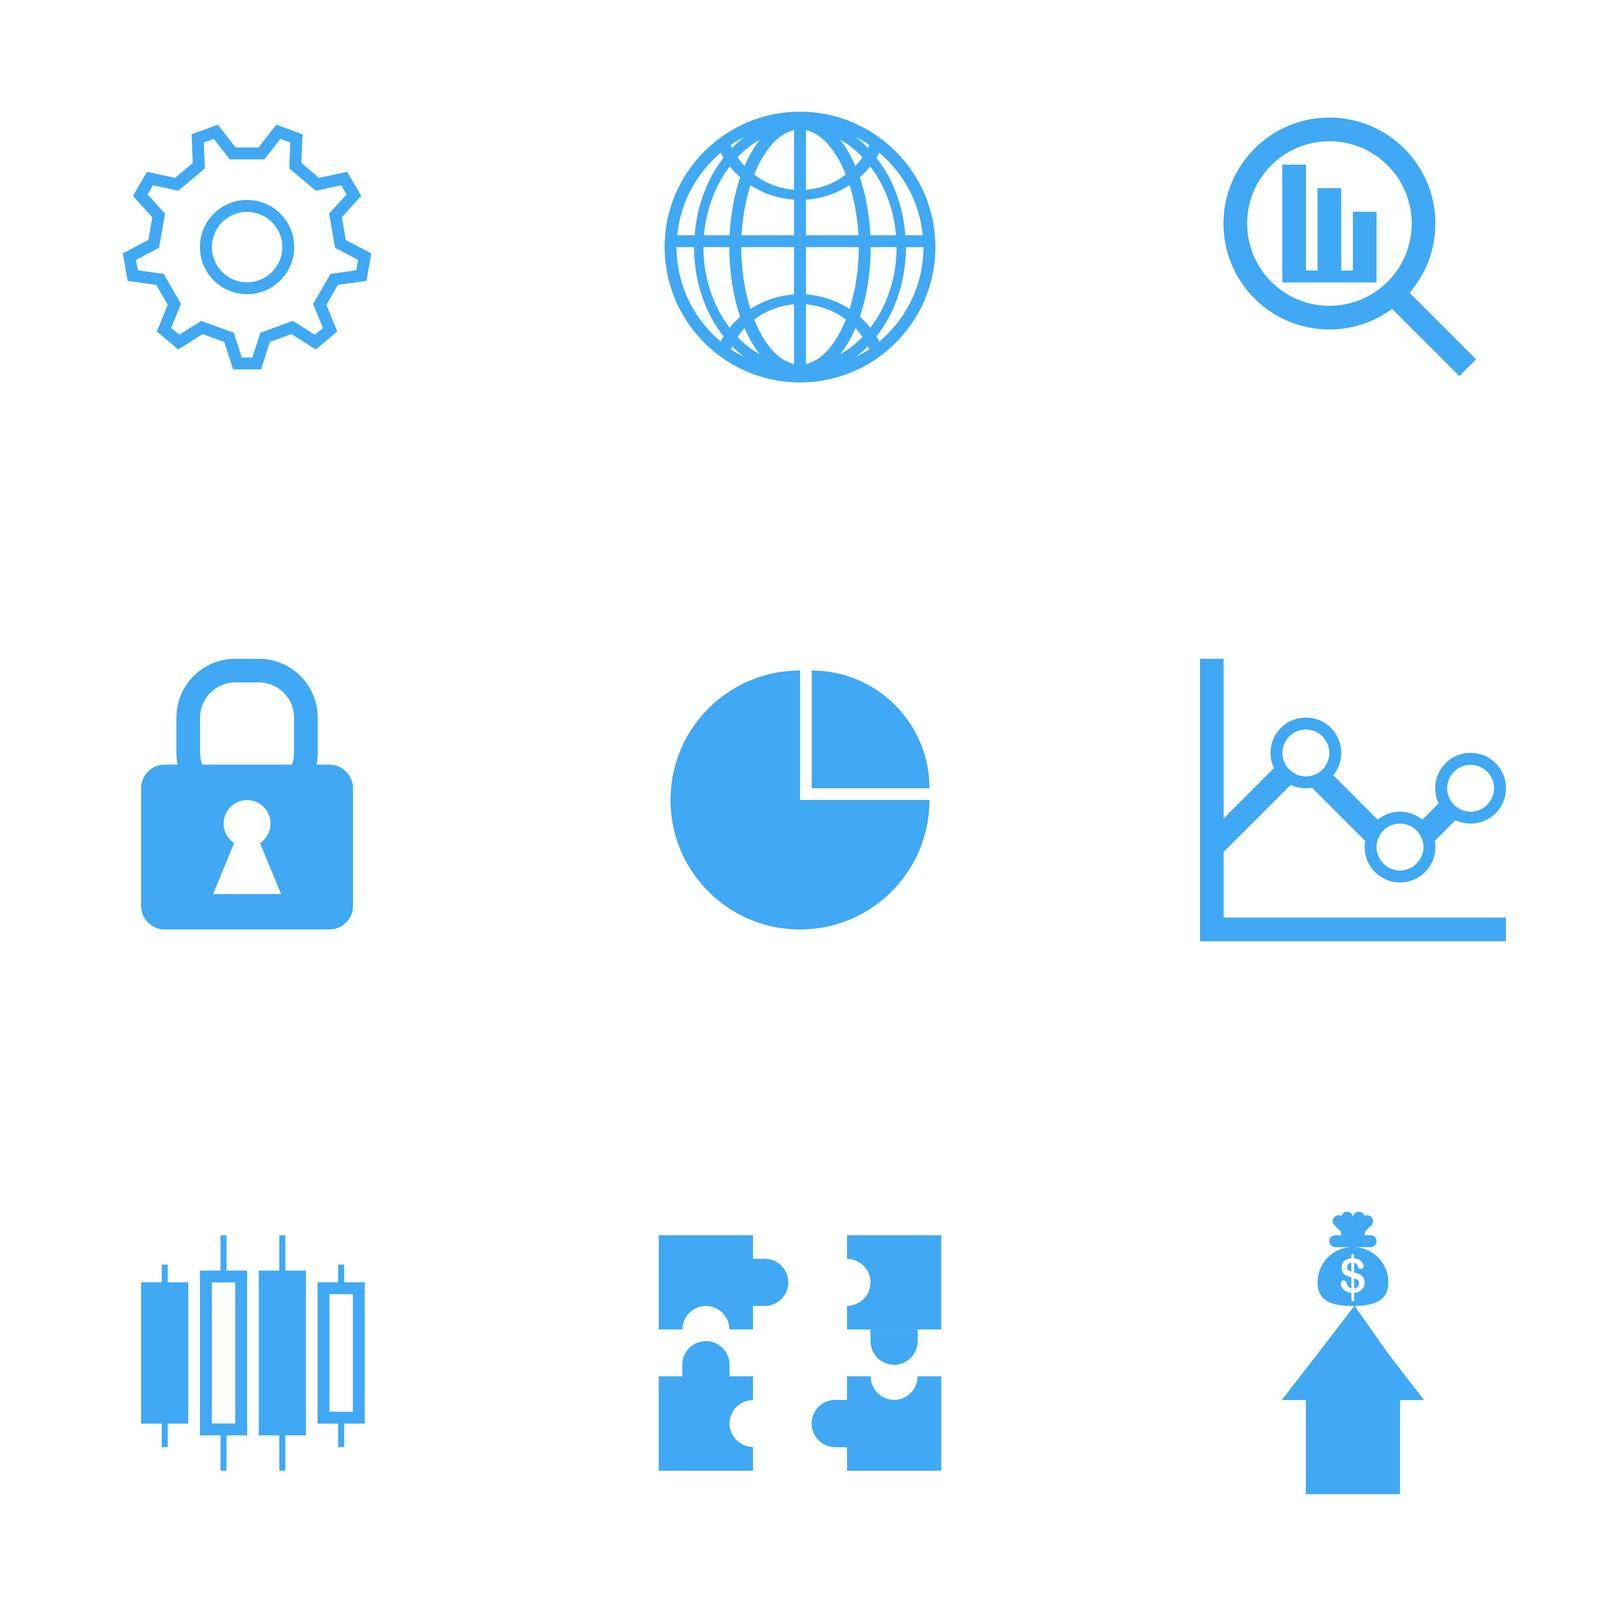 Financial icon set. icons such as graph,charts, global and others with a white background. by Kongmeesuk